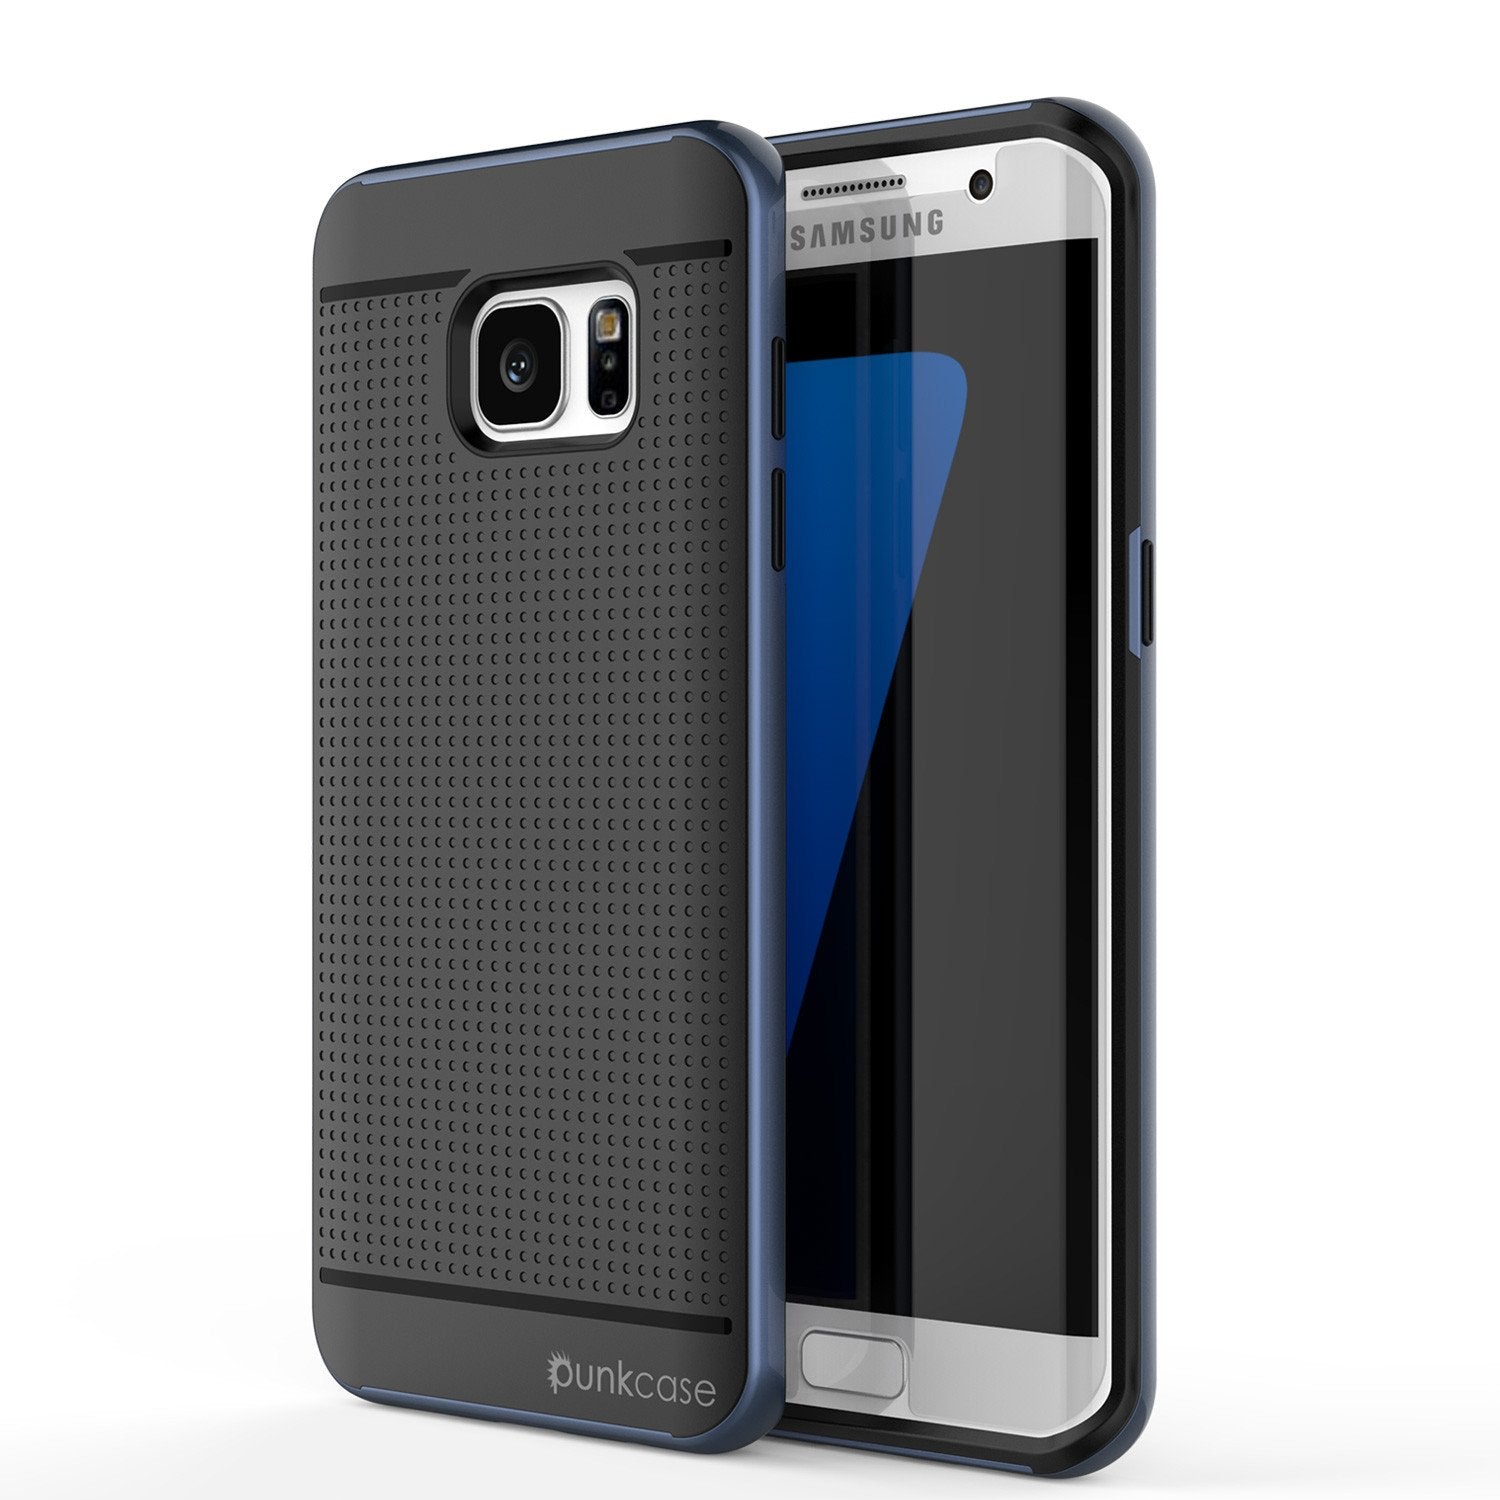 Galaxy S7 Edge Case, PunkCase STEALTH Navy Blue Series Hybrid 3-Piece Shockproof Dual Layer Cover - PunkCase NZ